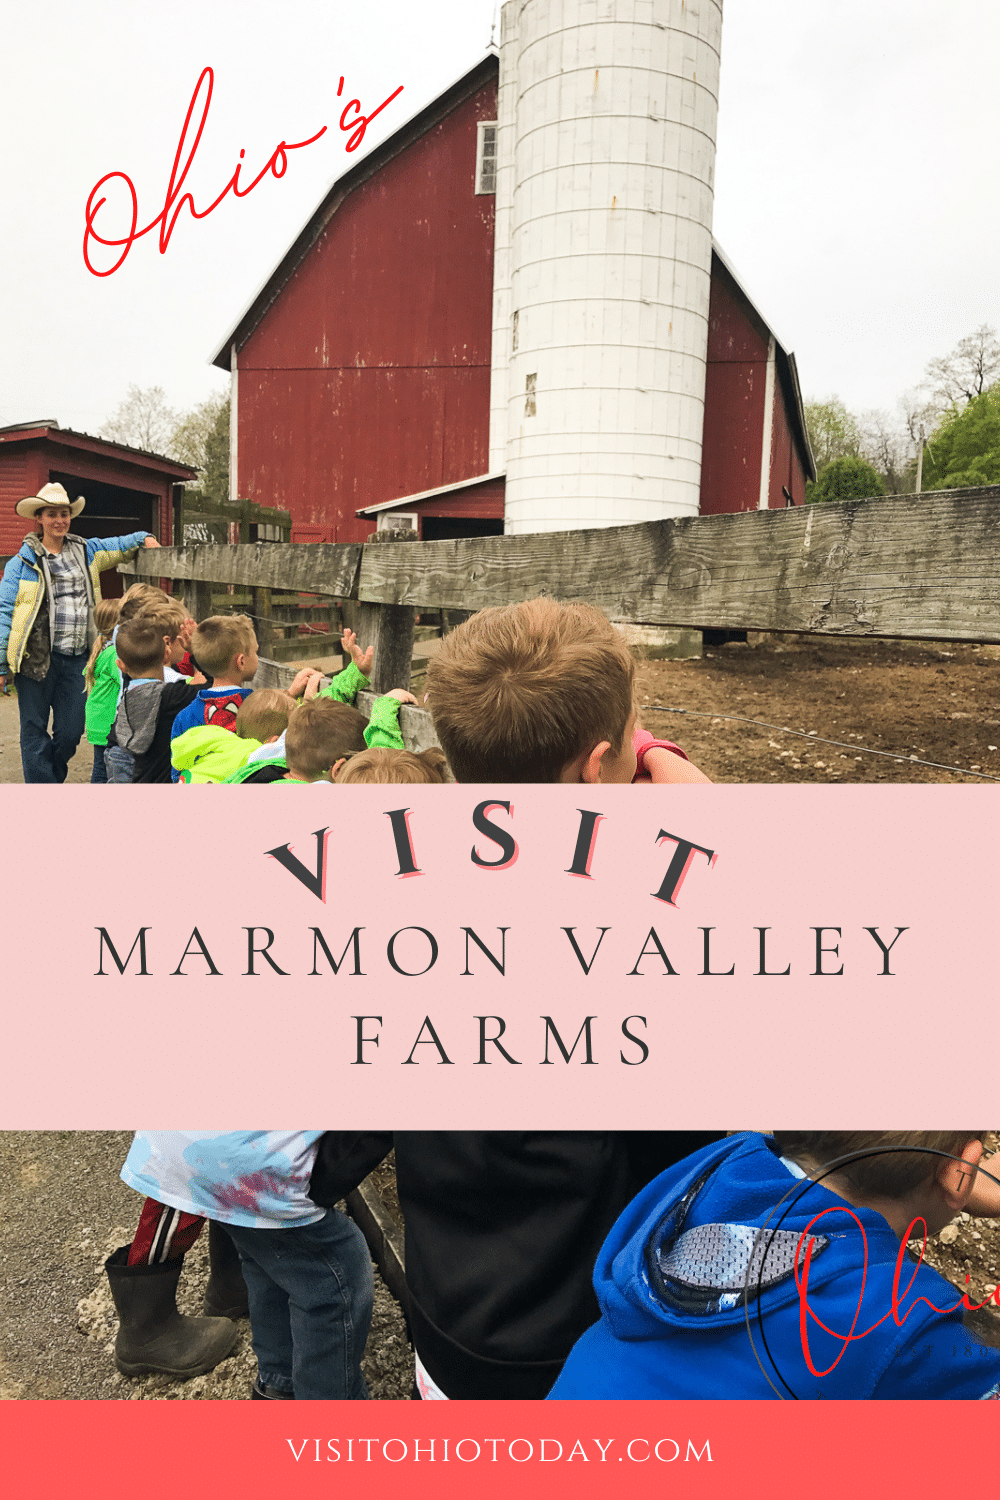 With over 150 horses, Marmon Valley Farms is the perfect place to enjoy a trail ride through the beautiful wooded countryside. The farm is also popular for summer camps and school field trips. #MarmonValley #horses #ohio #horsebackriding